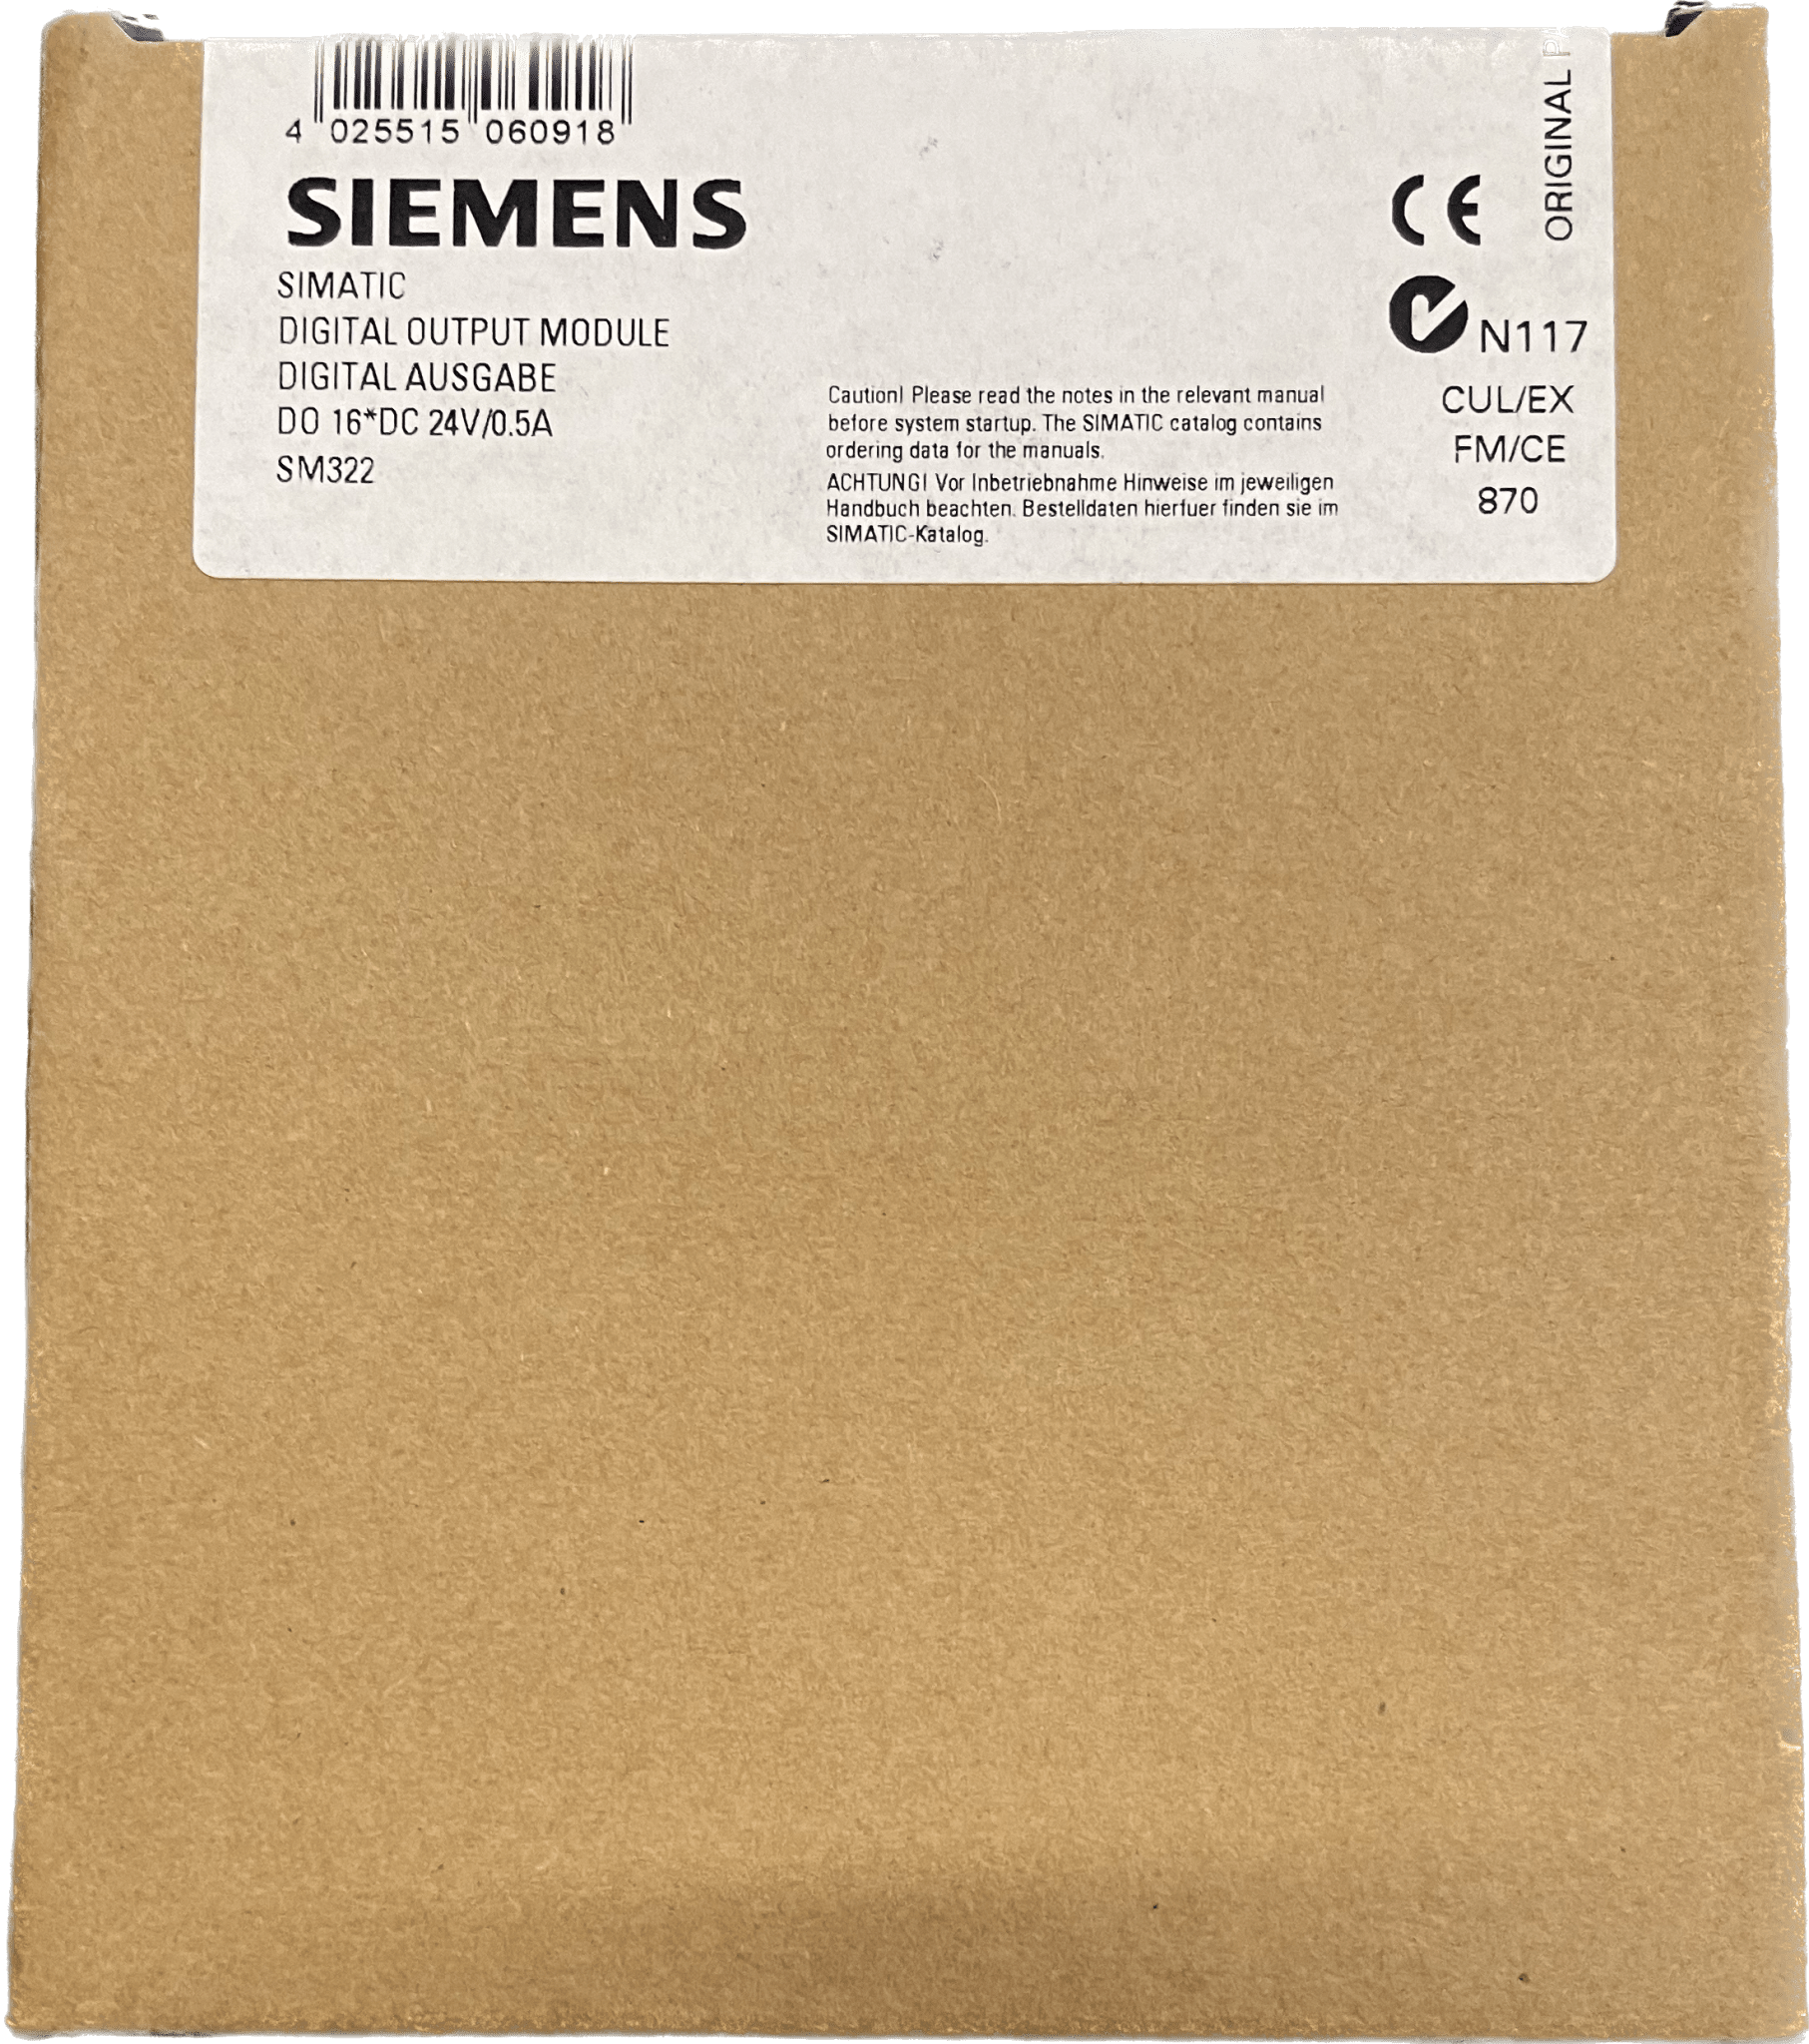 Siemens SIMATIC S7-300 6ES7 321-1BH01-0AA0 - #product_category# | Klenk Maschinenhandel